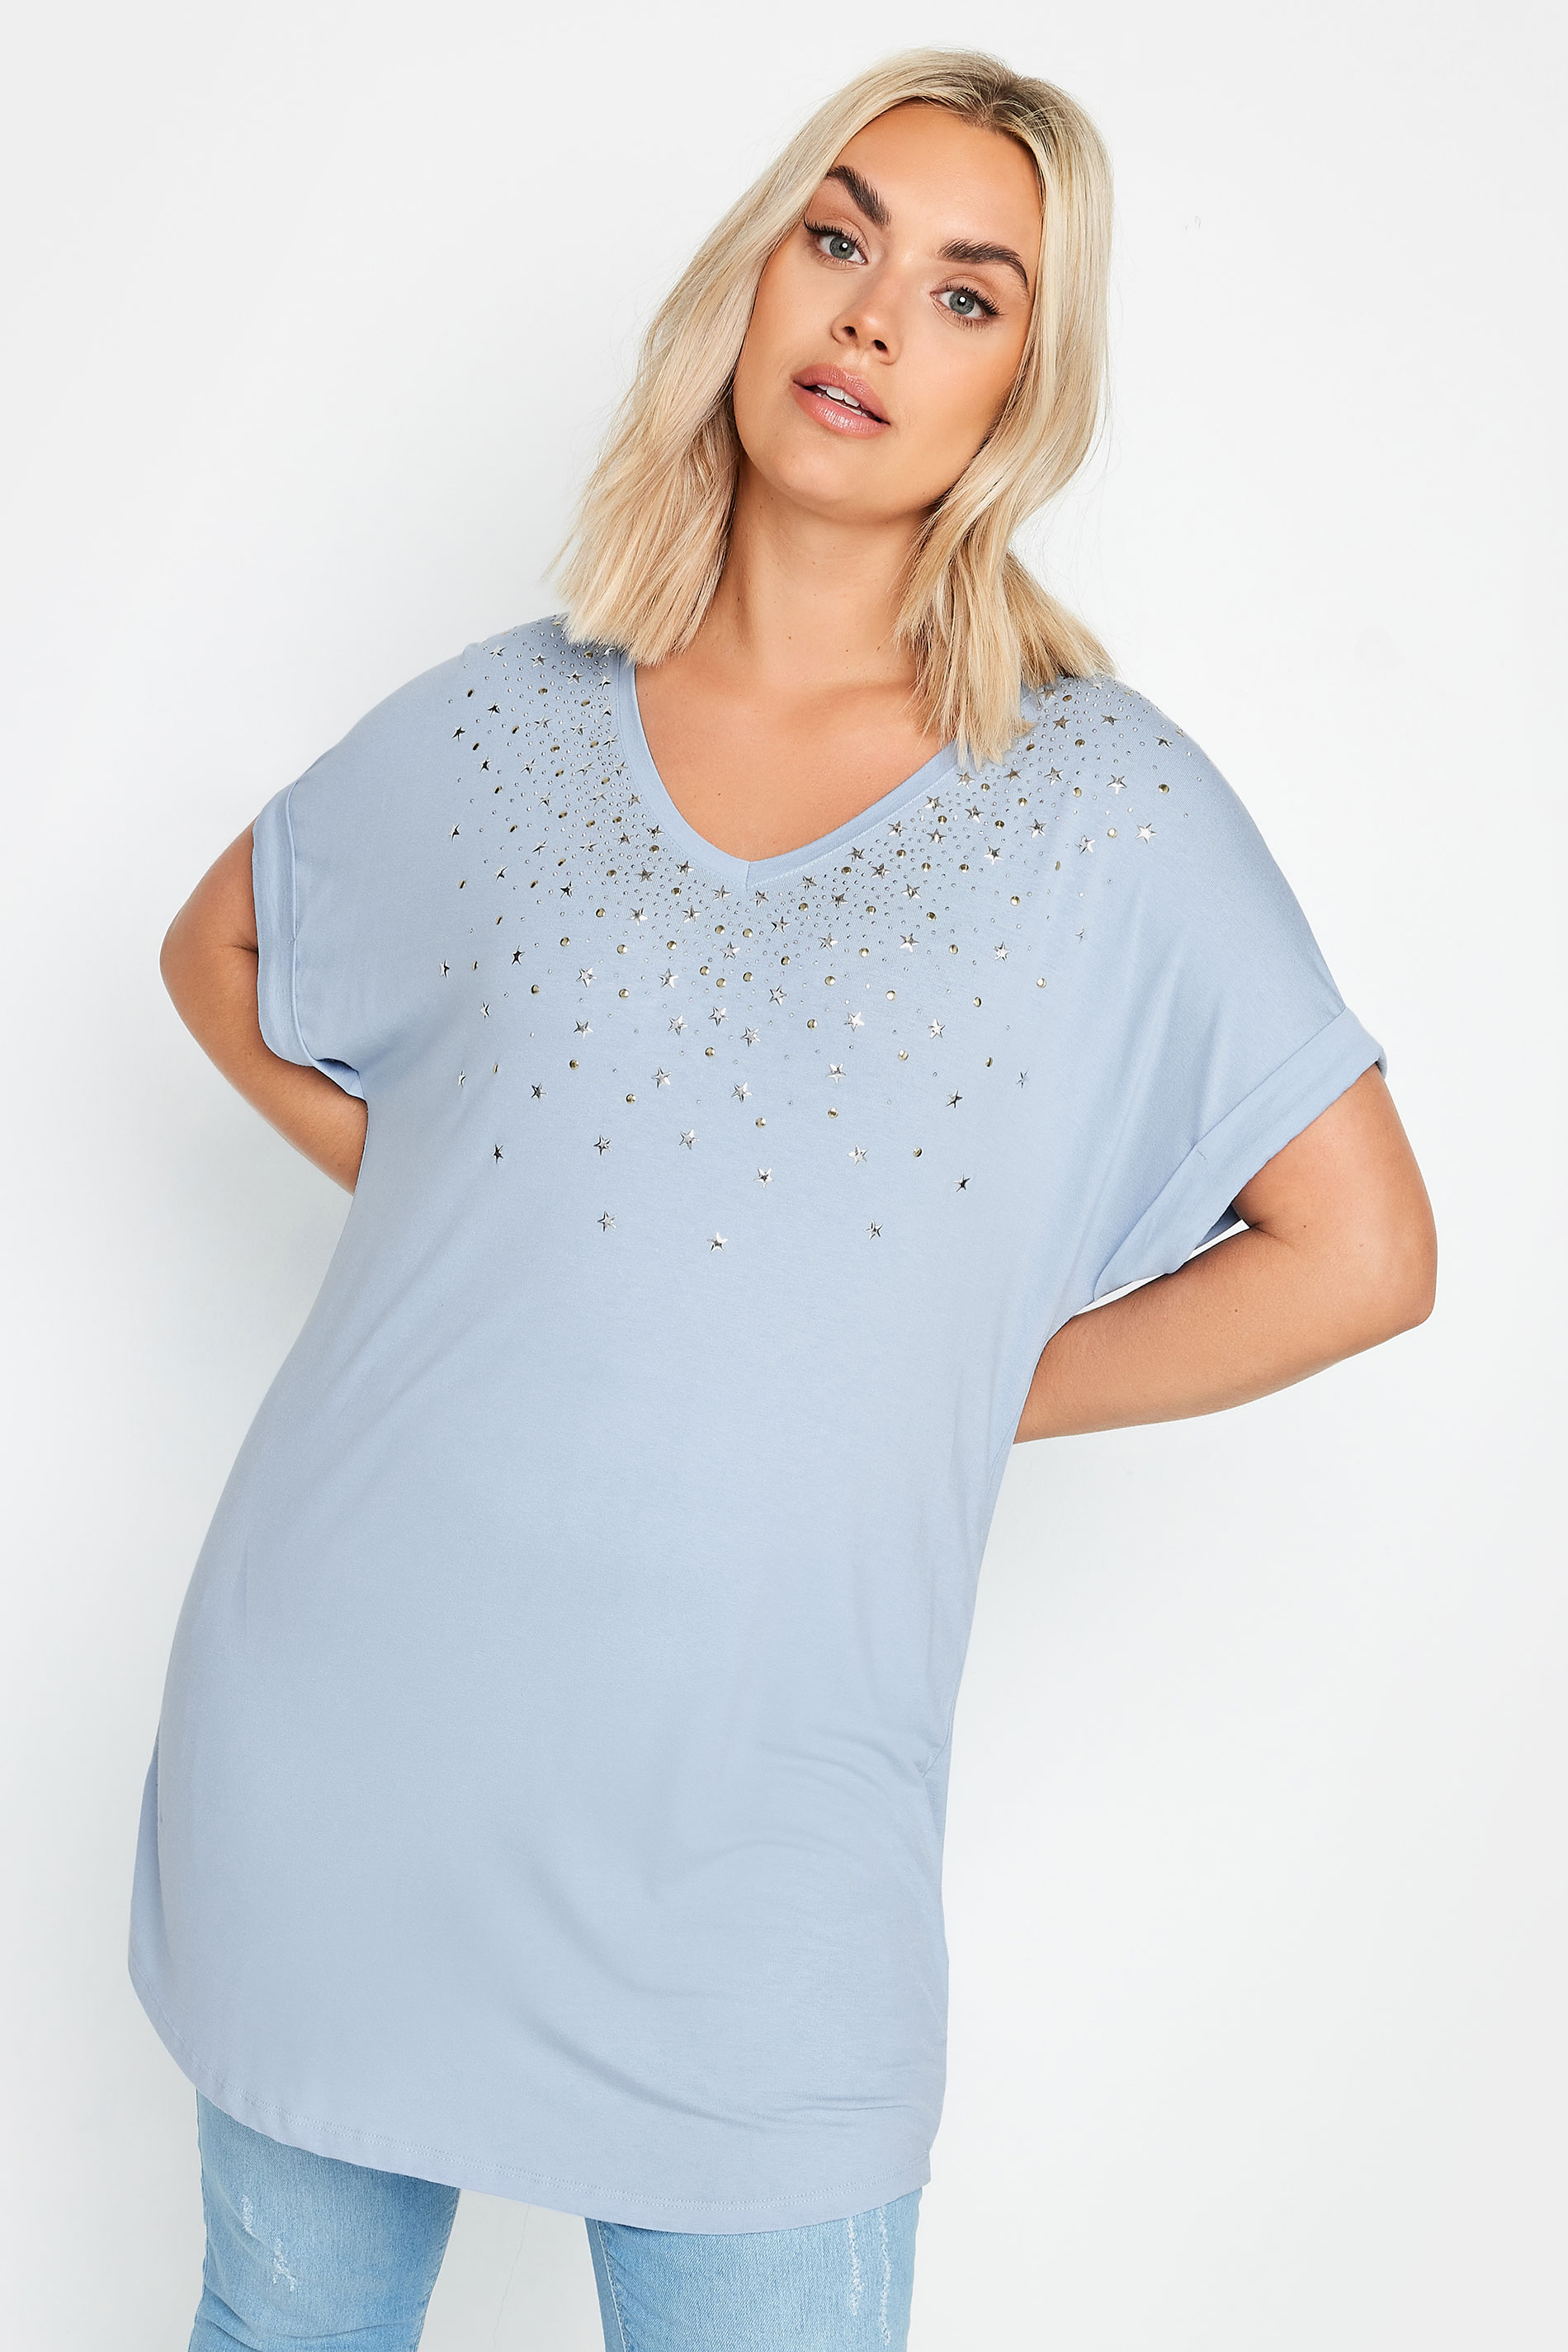 YOURS Plus Size Light Blue Sequin Star Embellished T-Shirt | Yours 